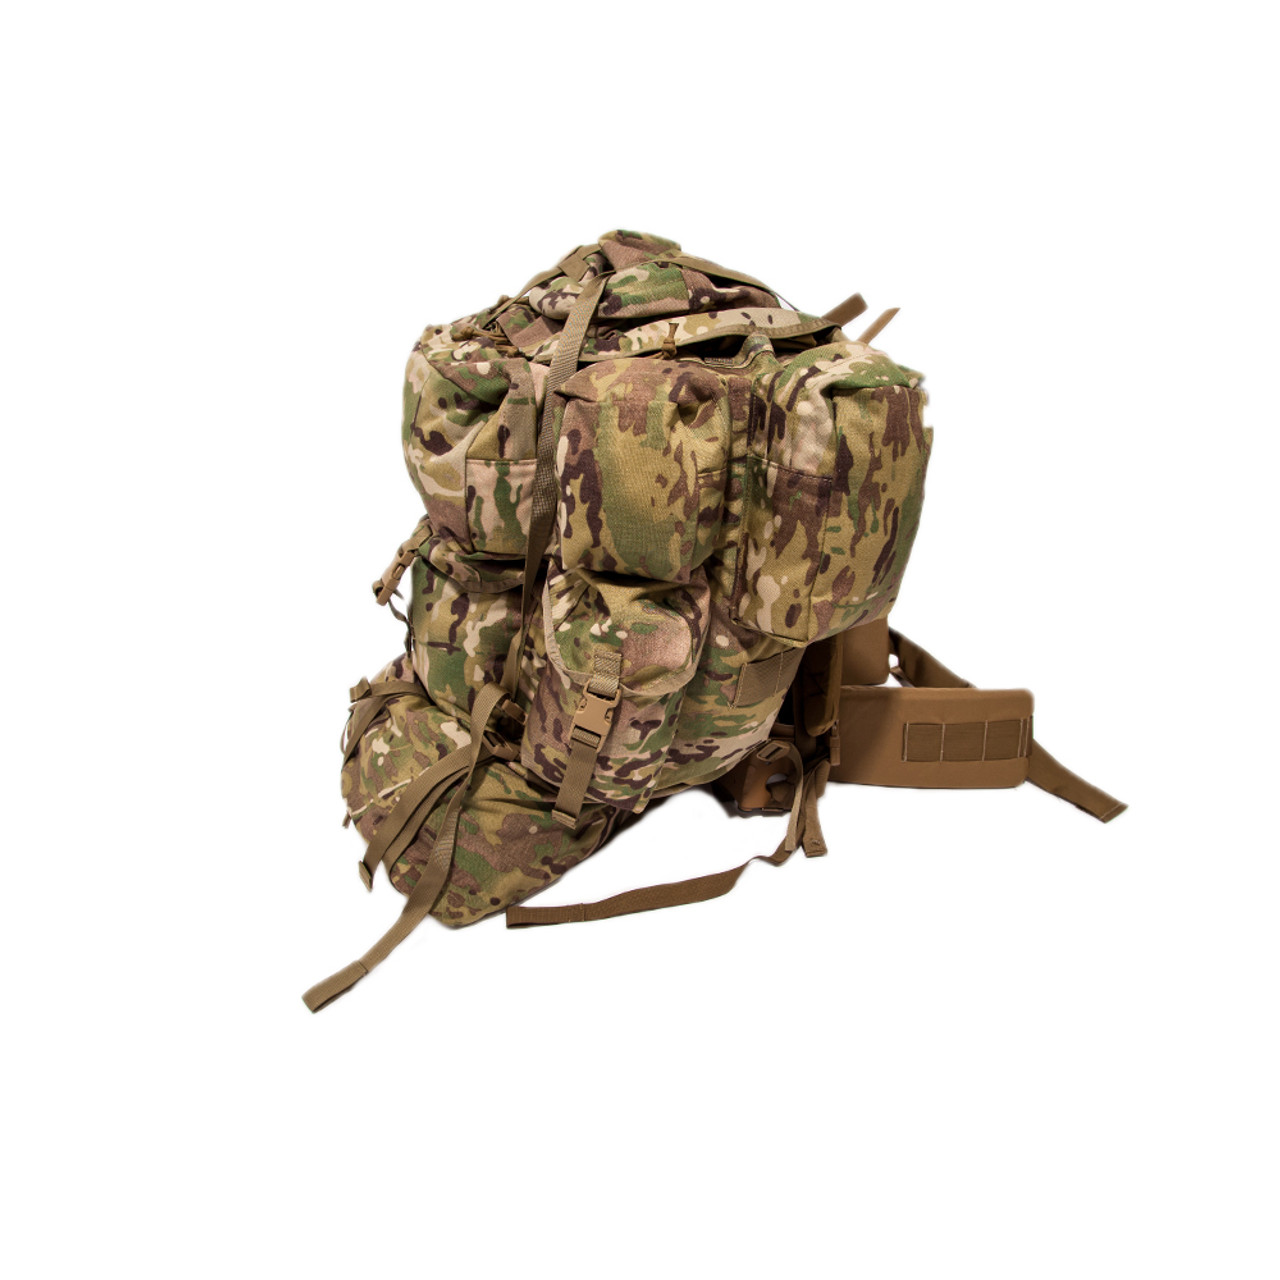 Tactical Tailor Malice Pack Version 2 Kit - BTI Tactical